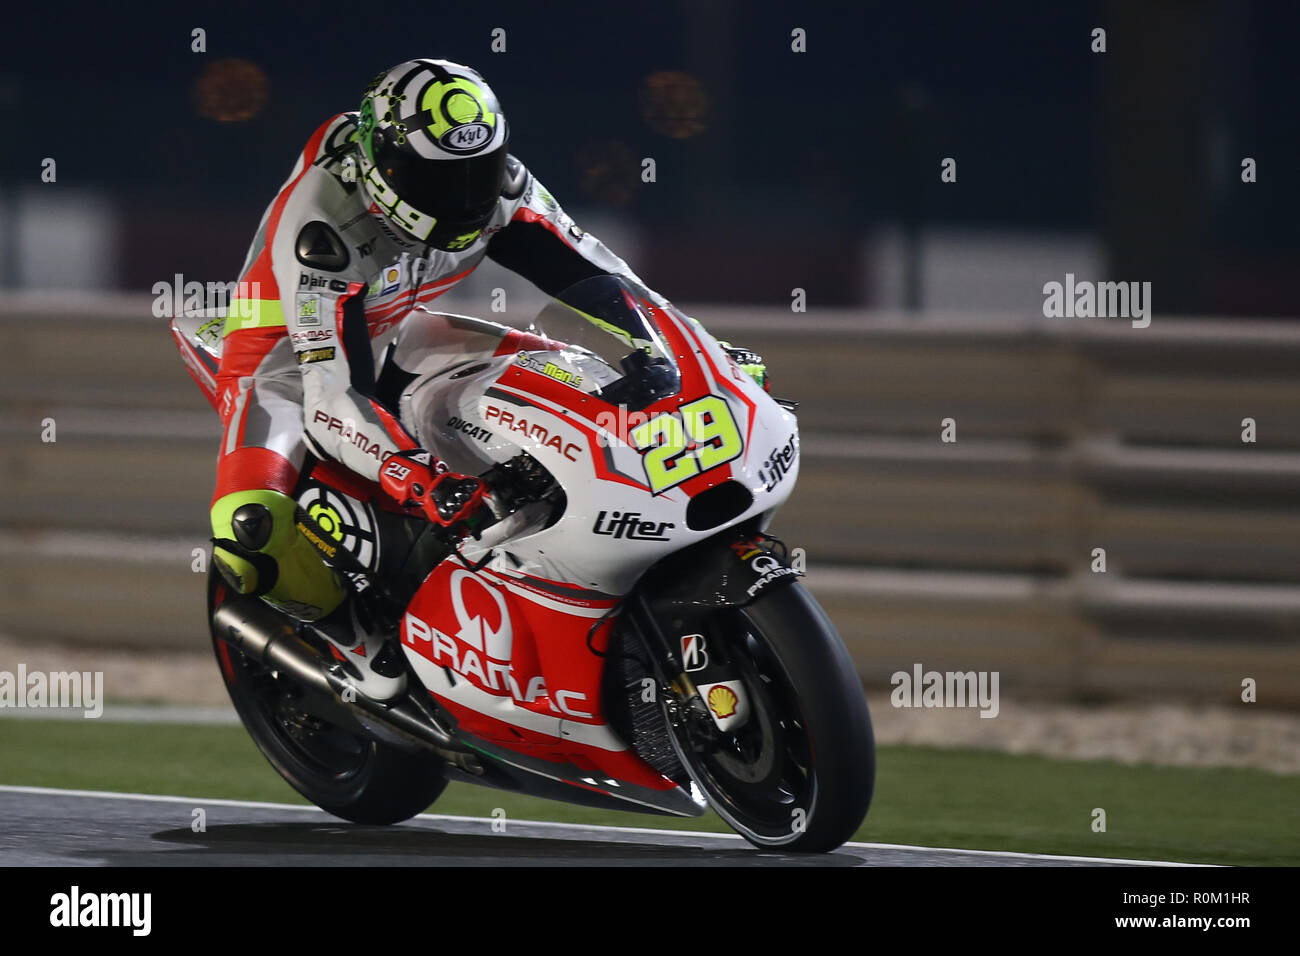 Andrea Iannone of Italy and Suzuki Ecstar team steers his bike during a final session of the Moto GP World Championship at the Losail International Circuit. Stock Photo